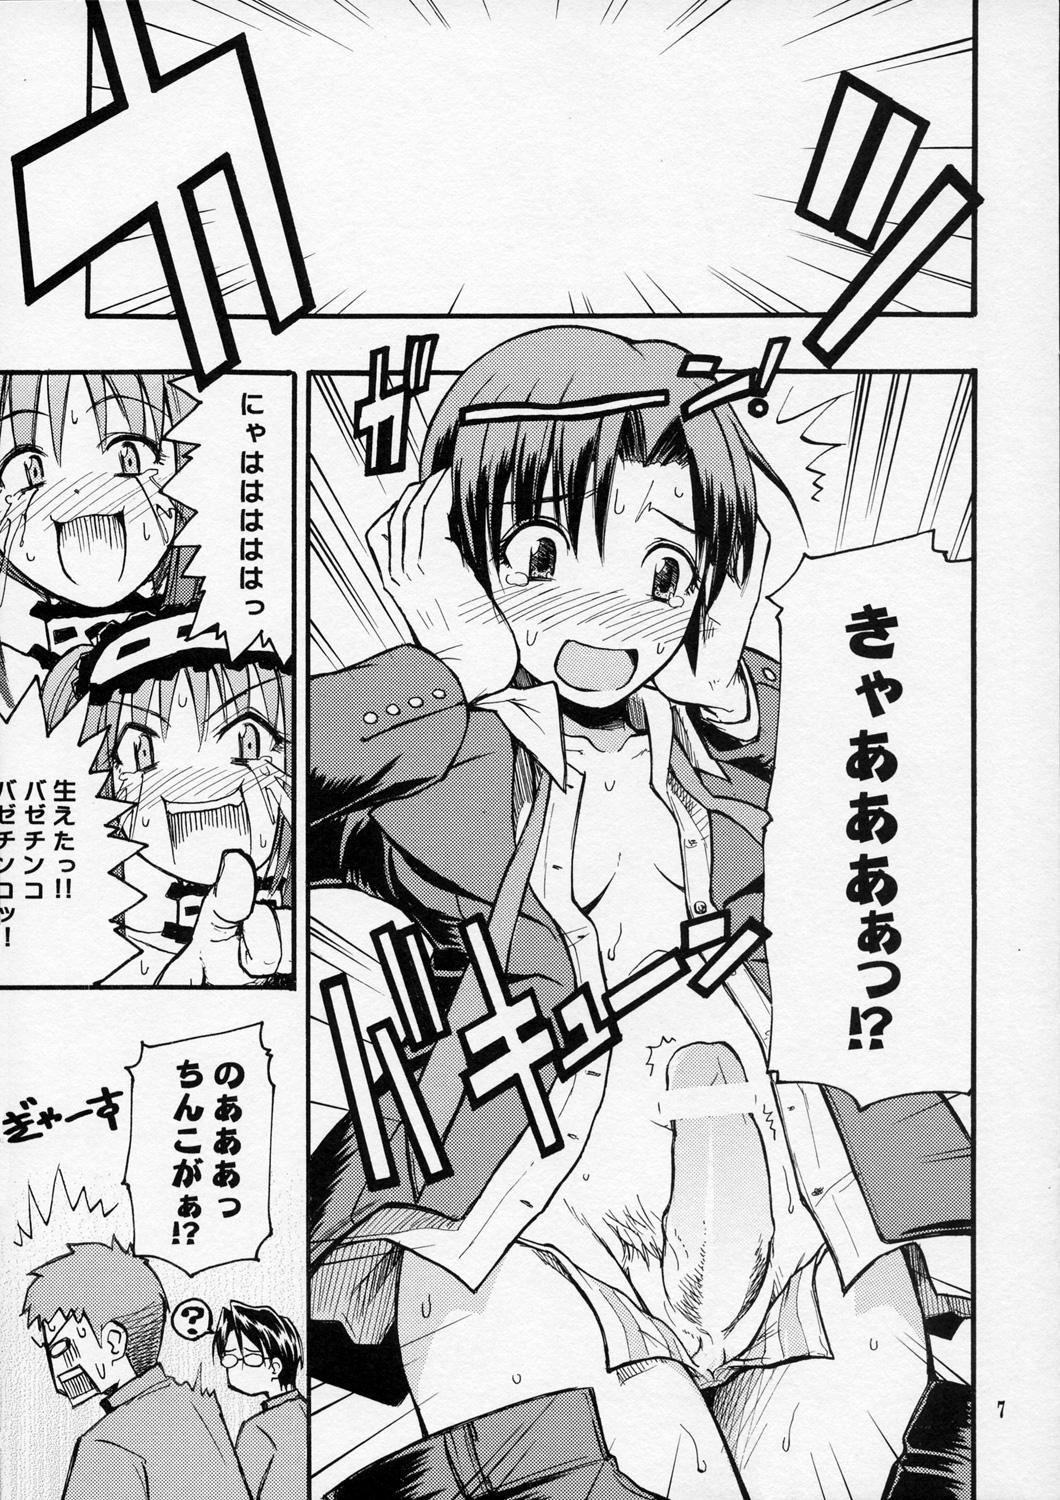 Cutie Itsukame Baby - Fate hollow ataraxia Guy - Page 6